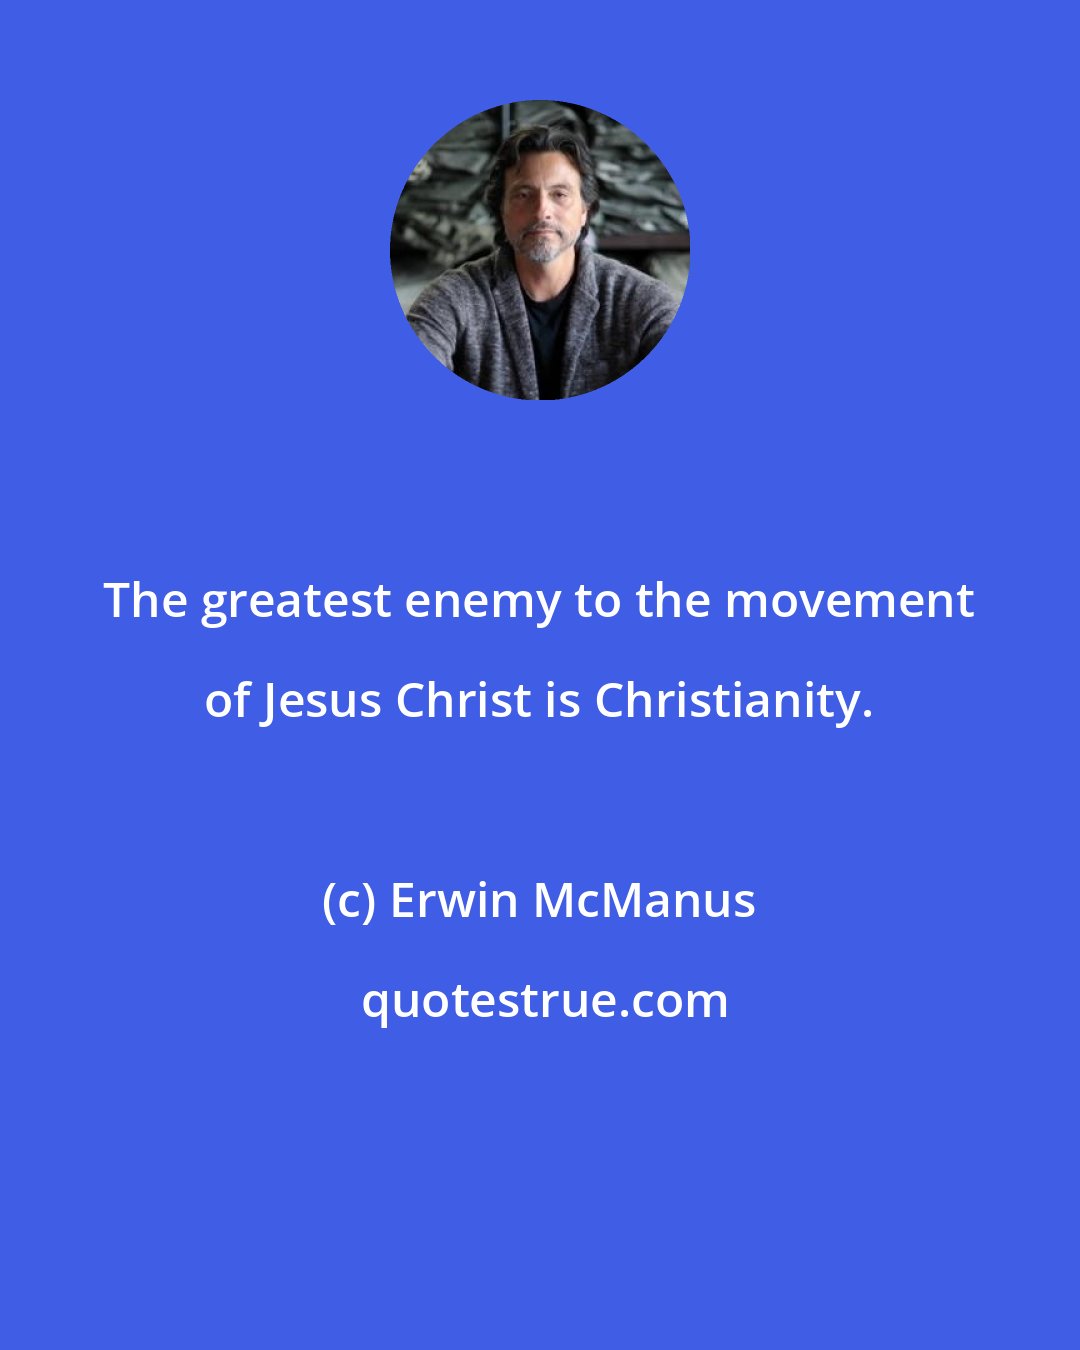 Erwin McManus: The greatest enemy to the movement of Jesus Christ is Christianity.